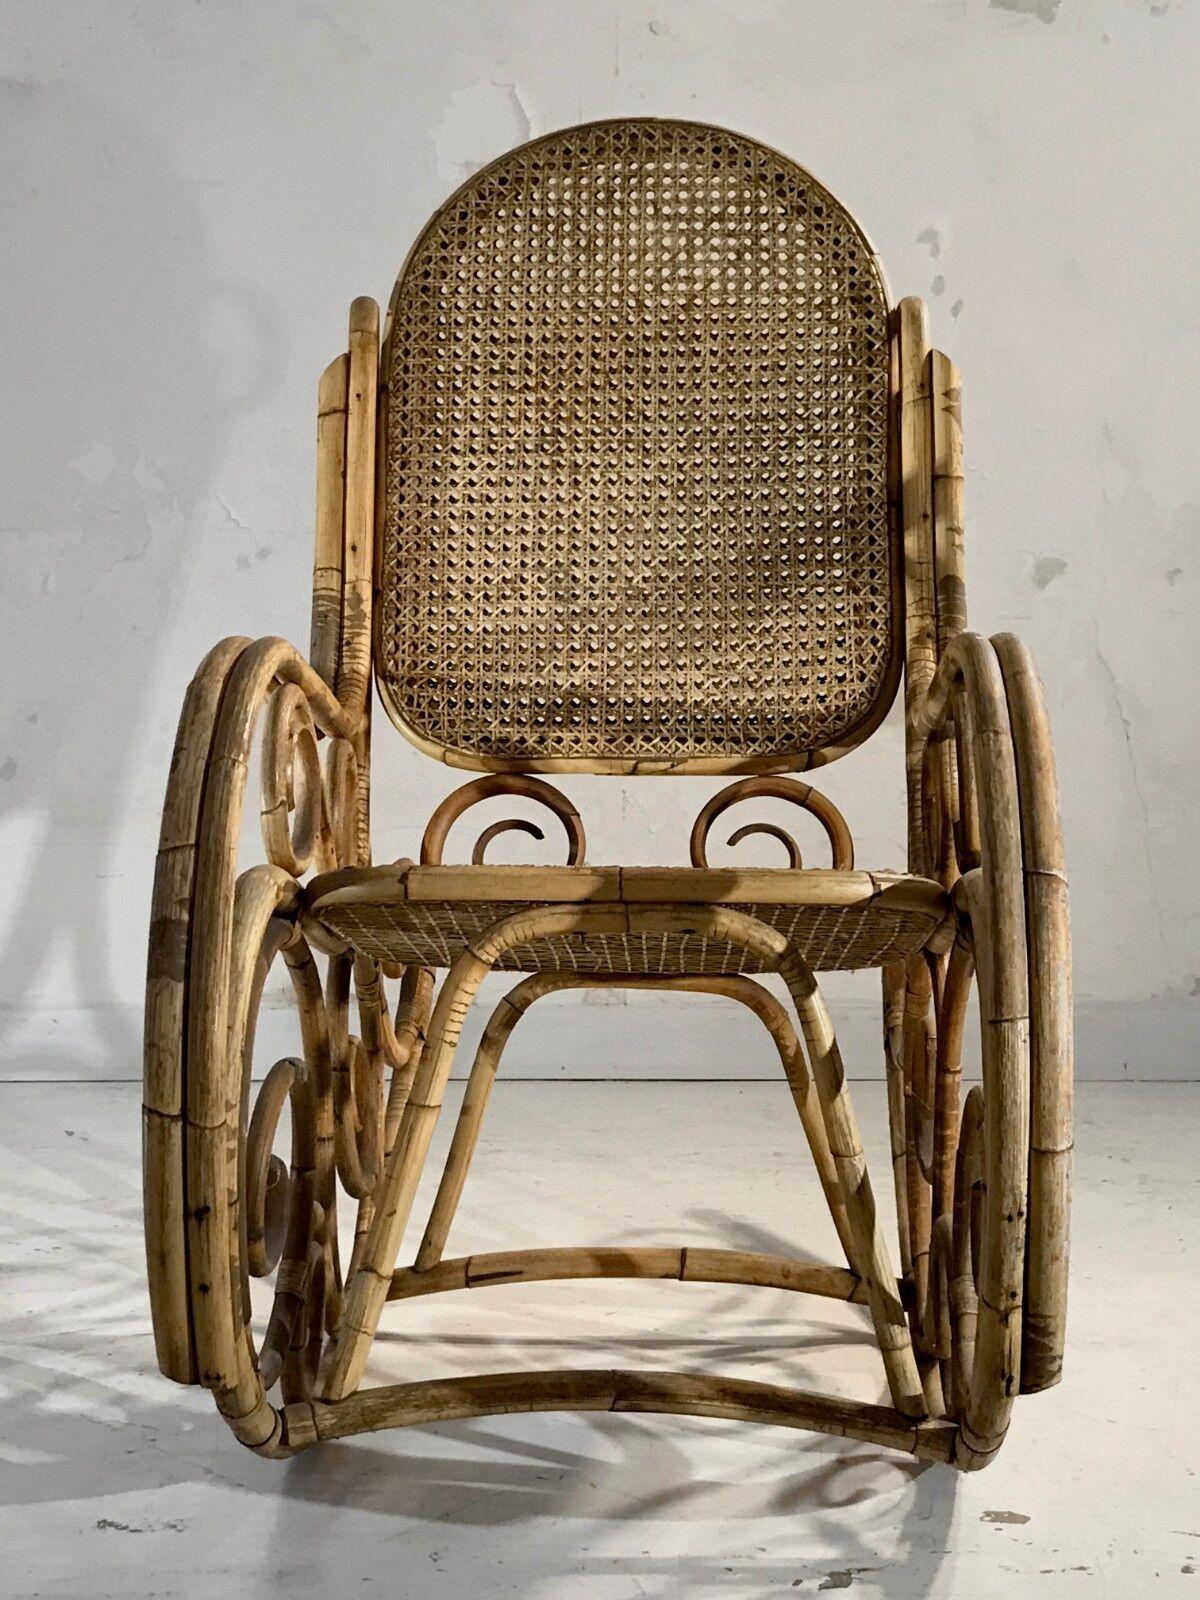 An Early MODERN NEO-CLASSICAL FREE-FORM ROCKING-CHAIR by THONET, France 1900 For Sale 1